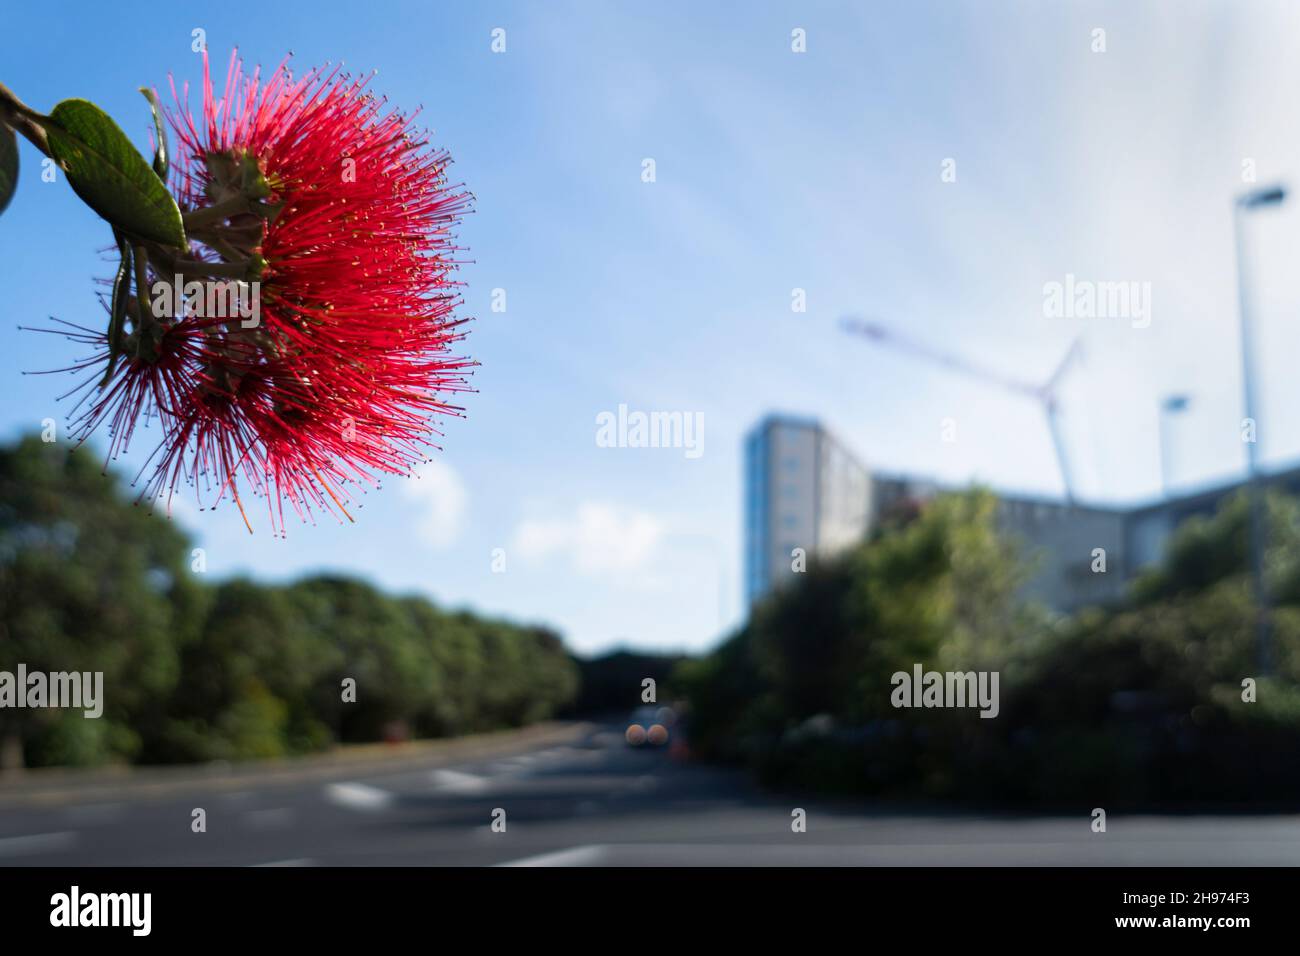 Red Pohutukawa flower with out-of-focus building and construction crane in the background Stock Photo